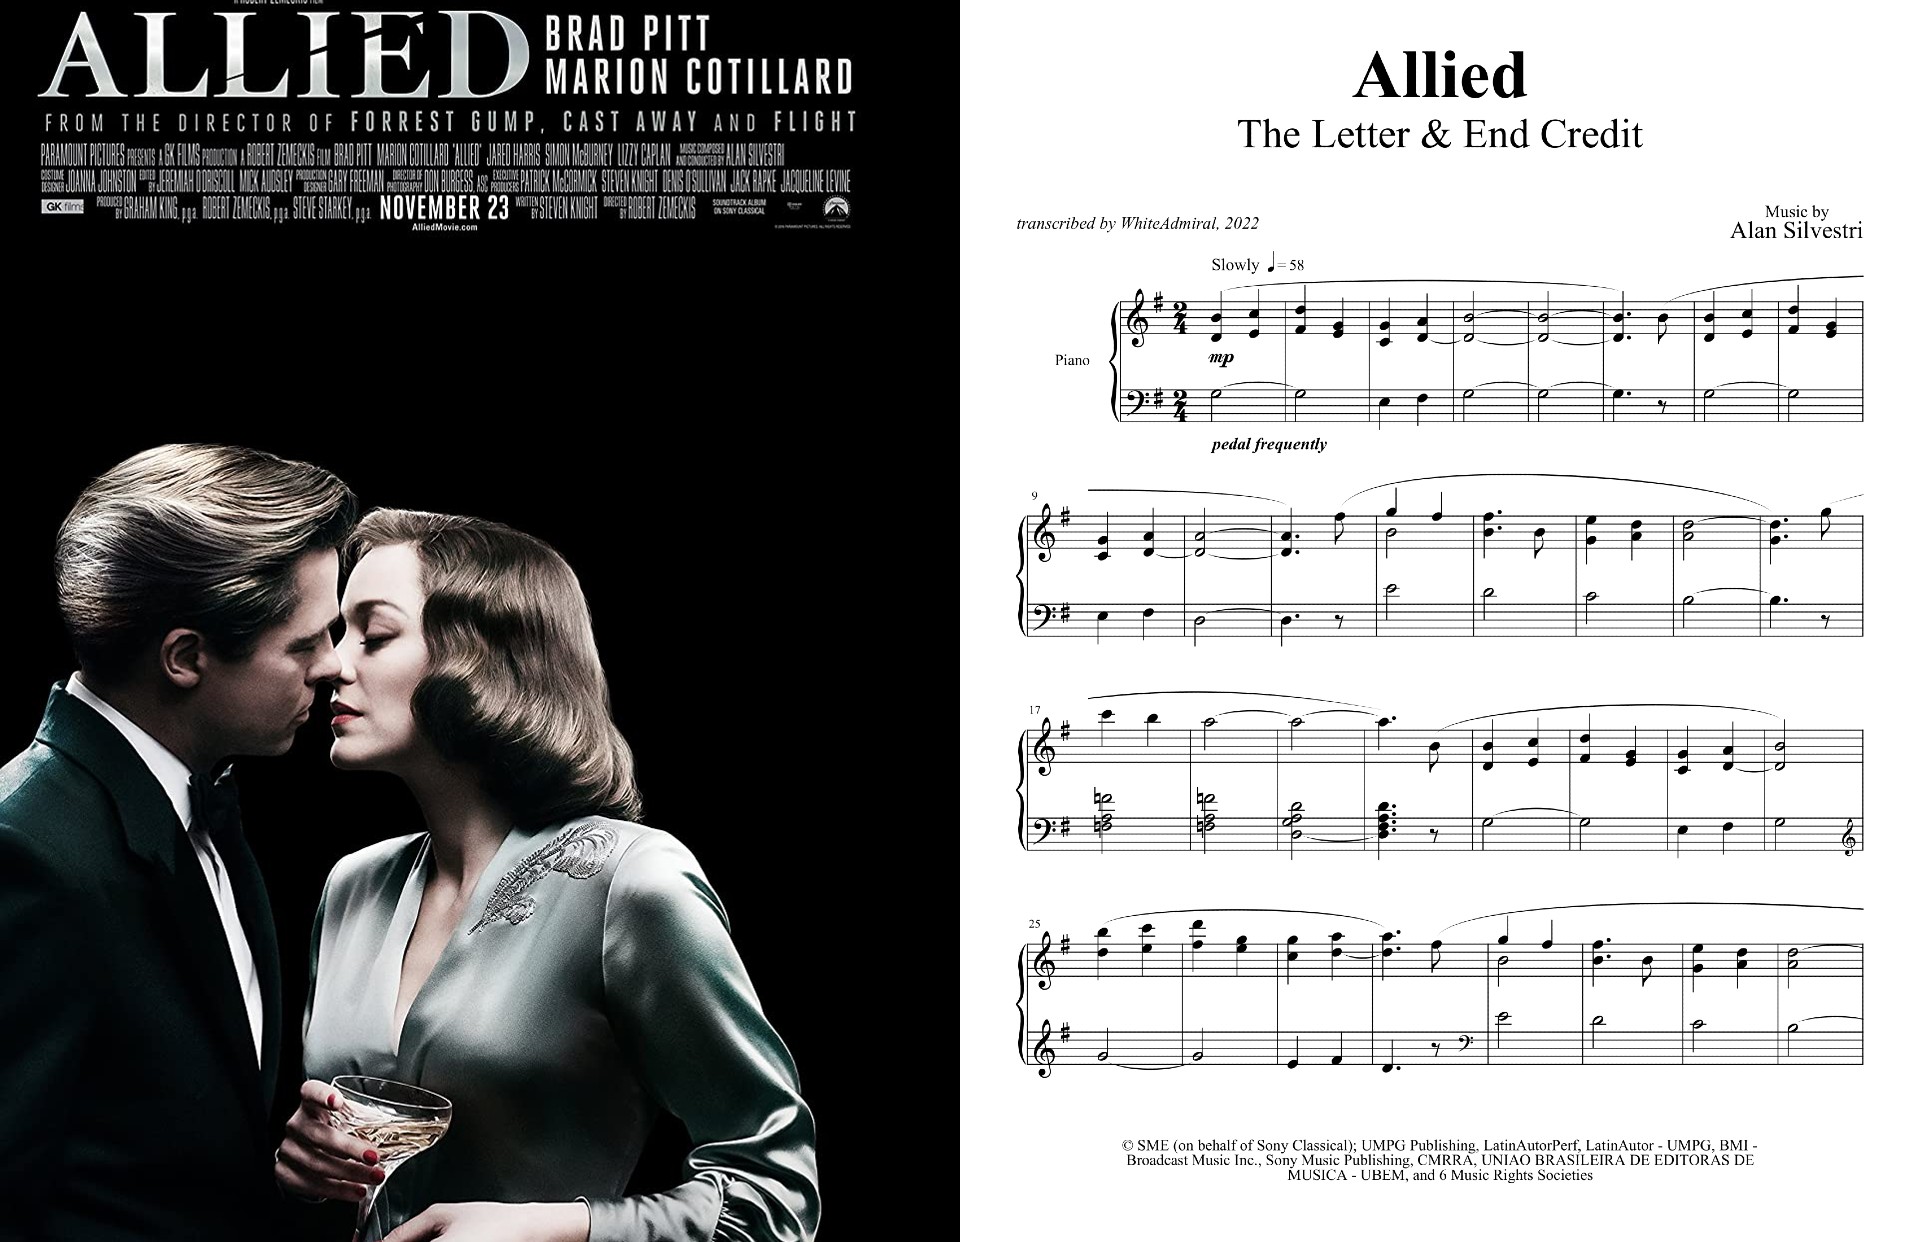 ALLIED - The Letter & End Credit.jpg